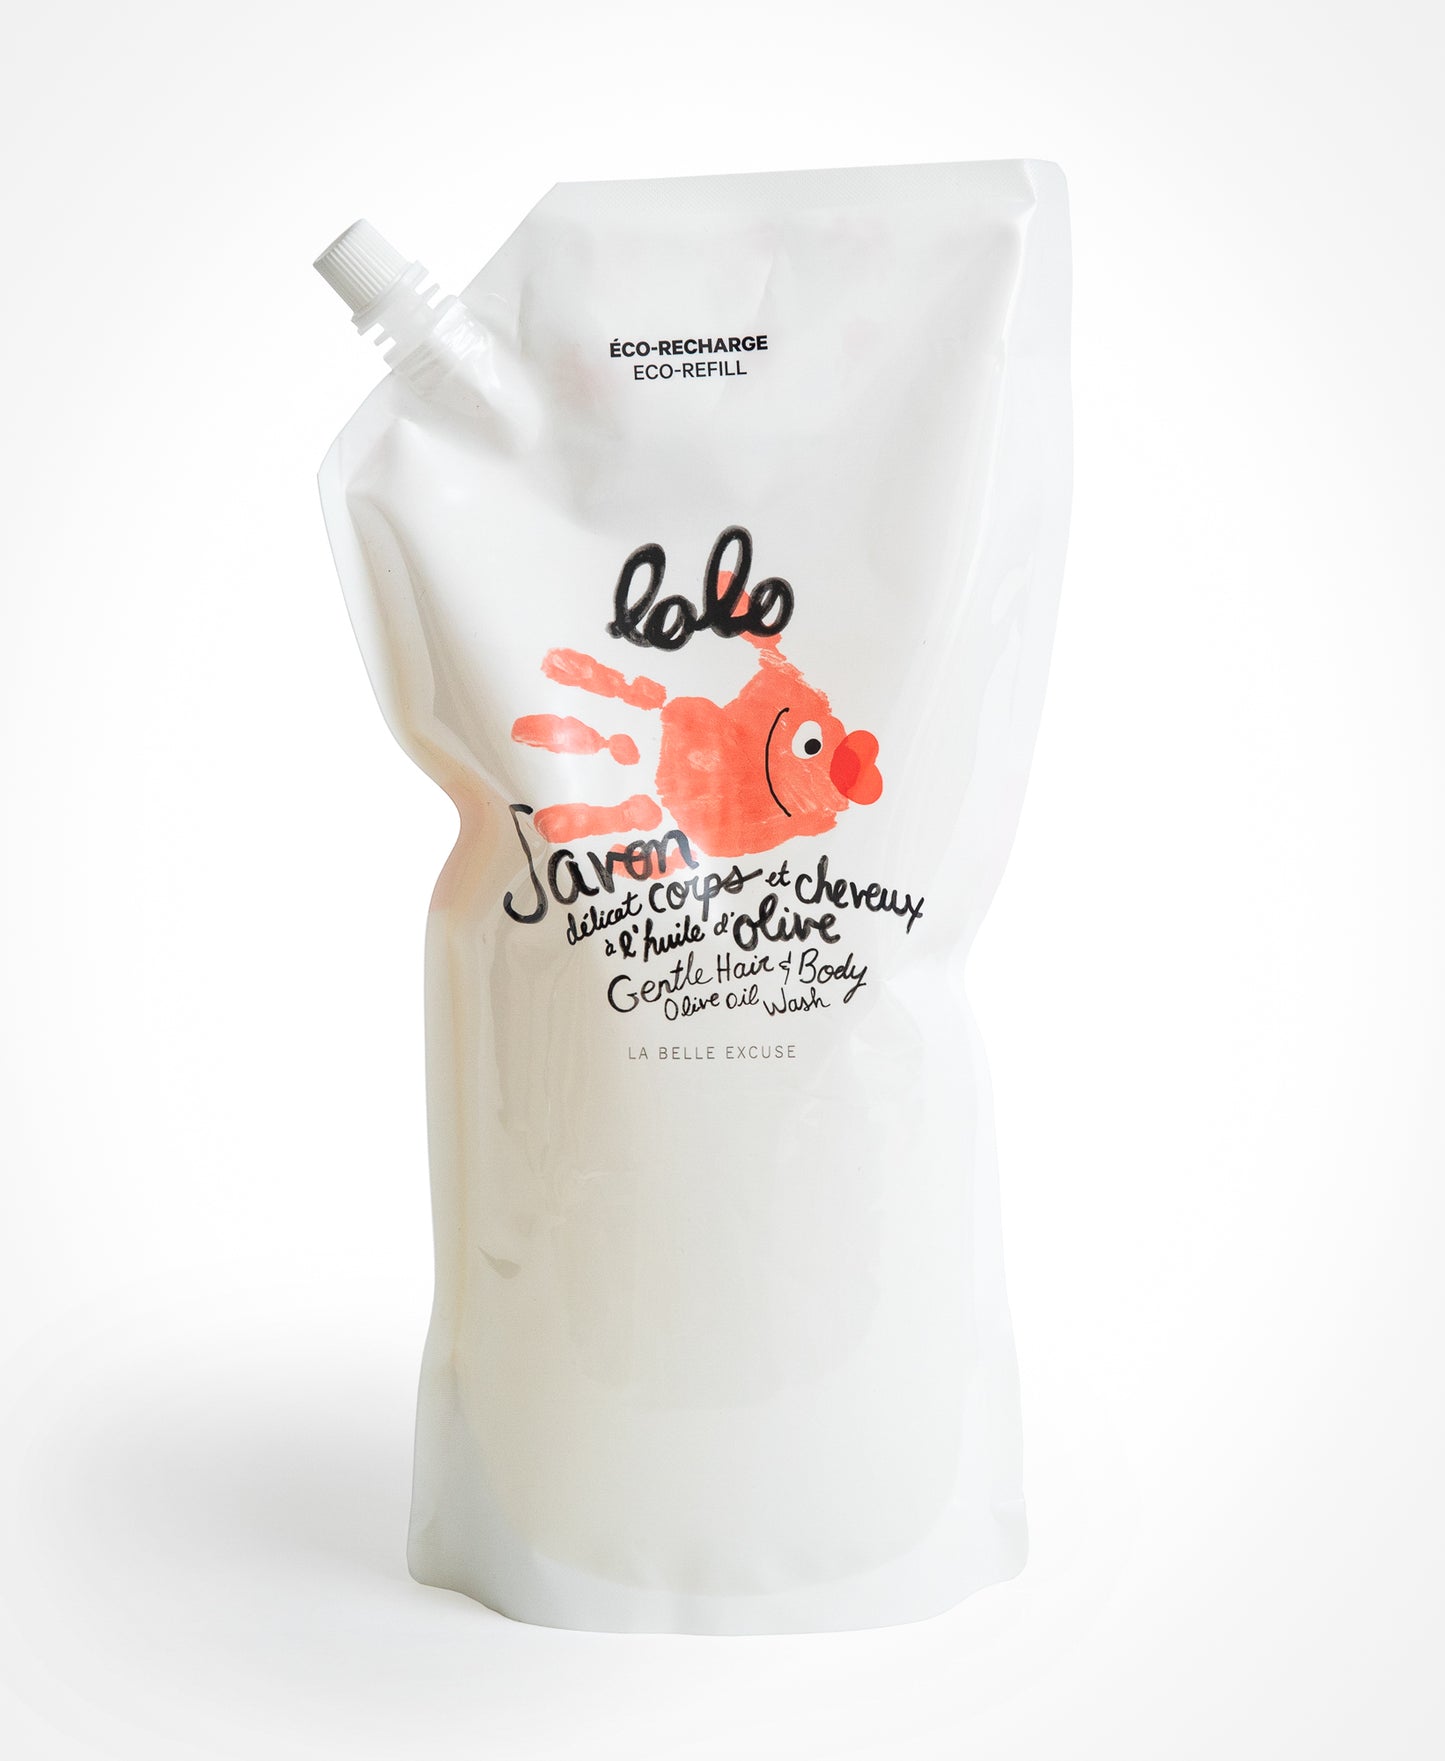 Olive Oil Gentle Hair & Body Wash LOLO